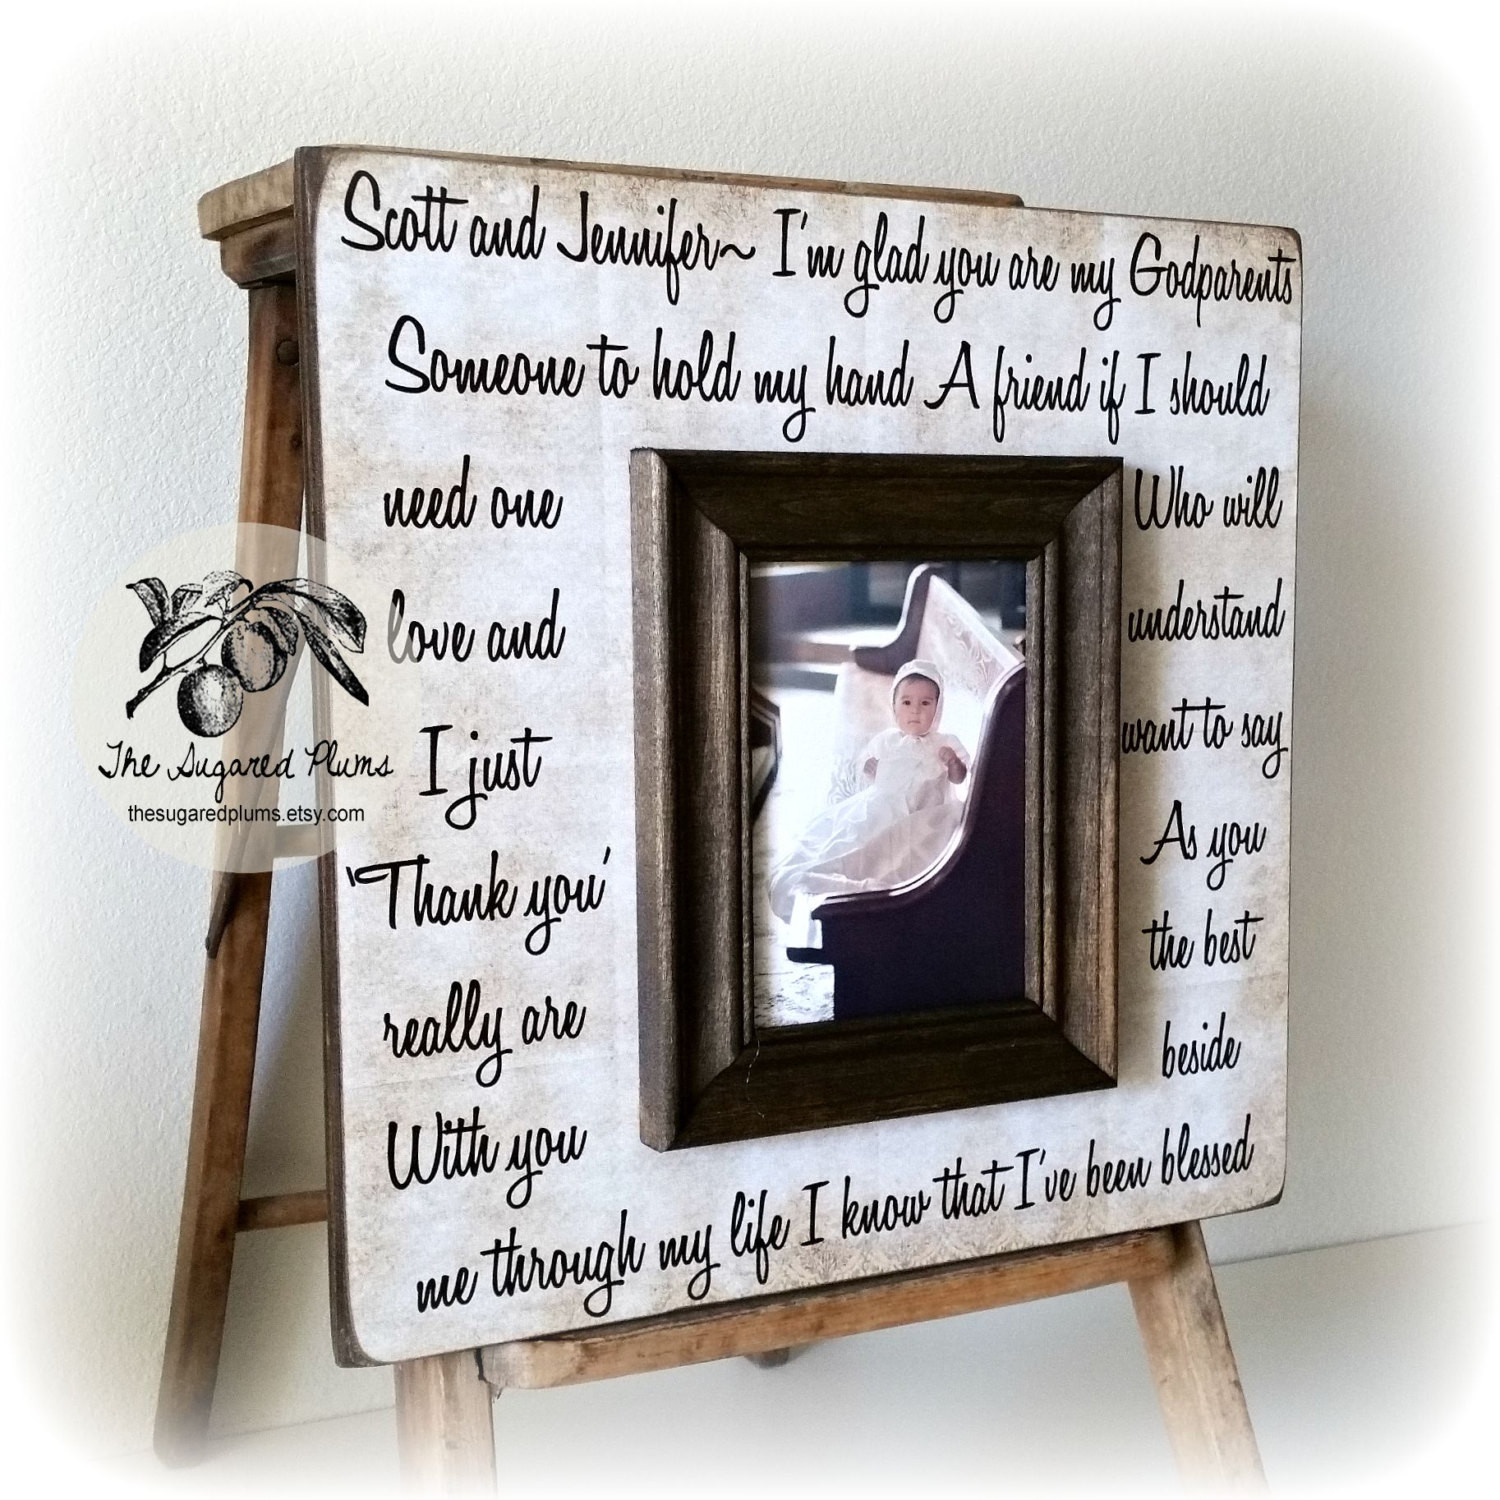 Godfather Gift Ideas For Christening
 Godmother Gift Godfather Gift Godparent Gift Baptism Gift